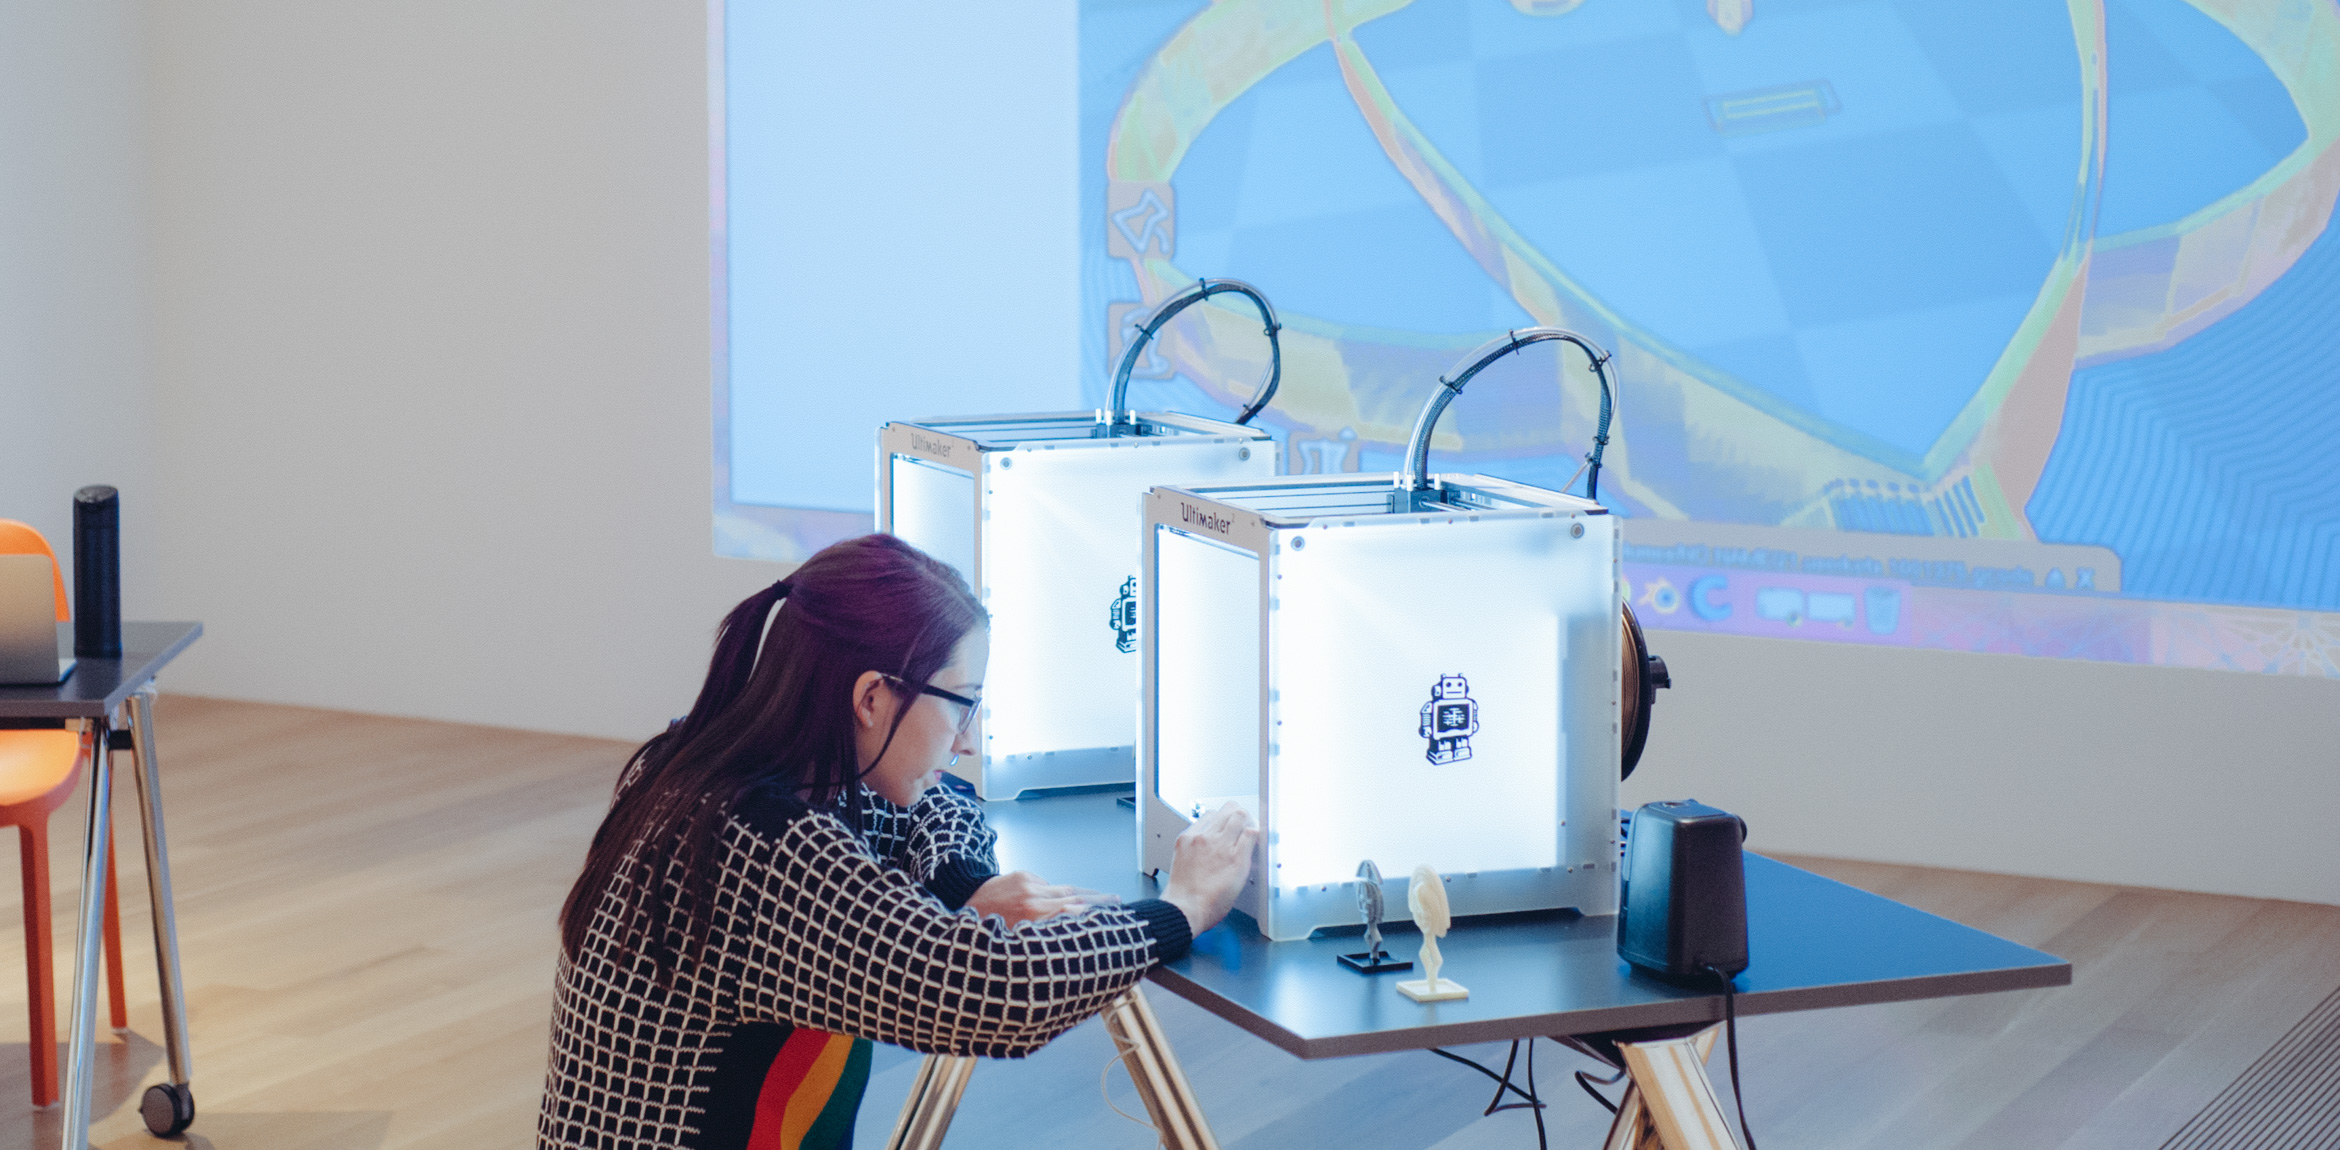 A visitor interacts with a 3-D printer during the event.